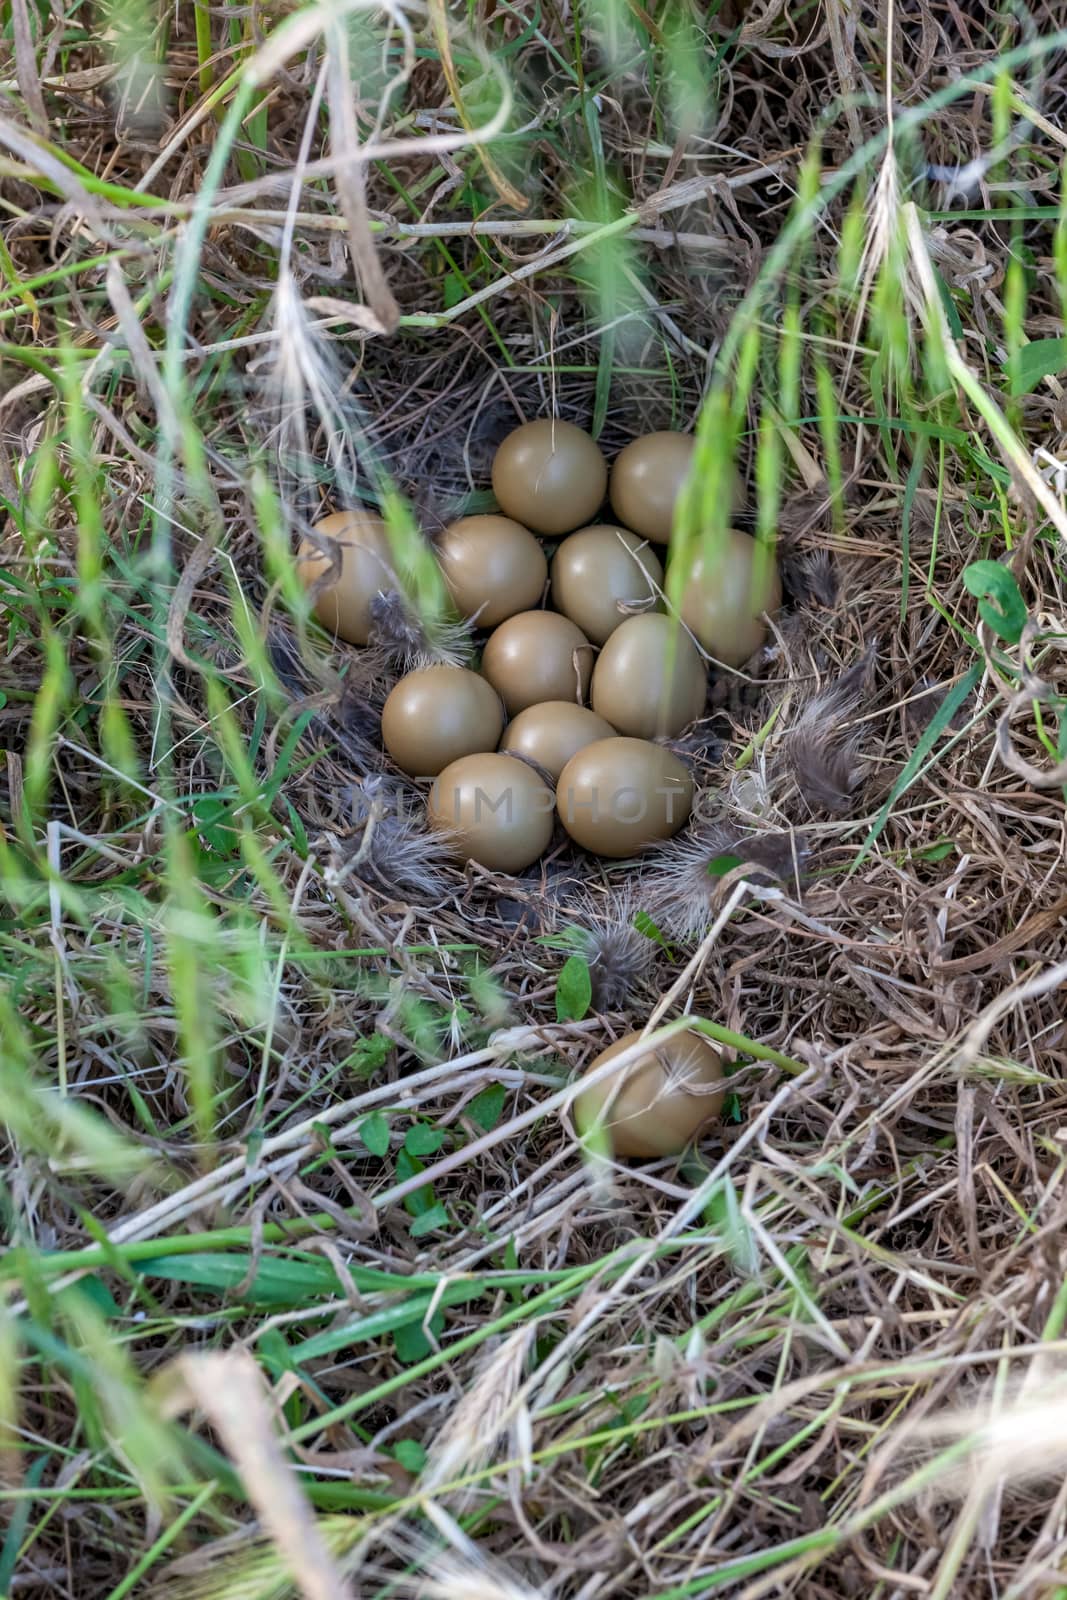 Pheasant nest by master1305